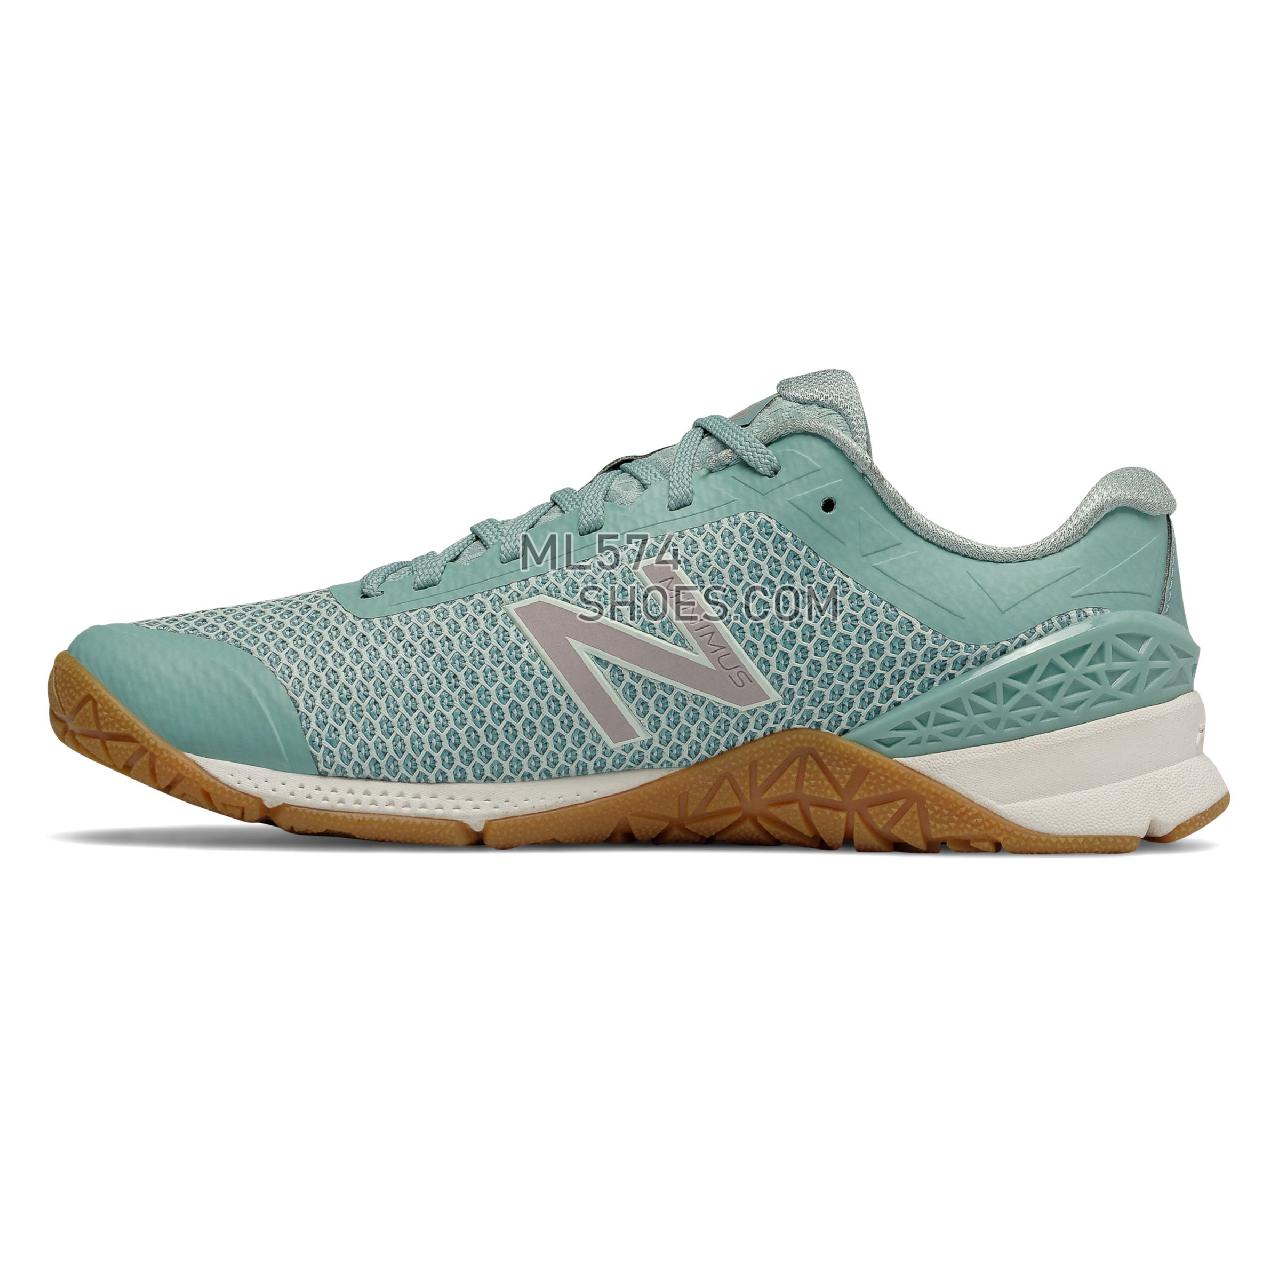 New Balance Minimus 40 Trainer - Women's 40 - X-training Ocean Air with Mineral Sage - WX40SS1